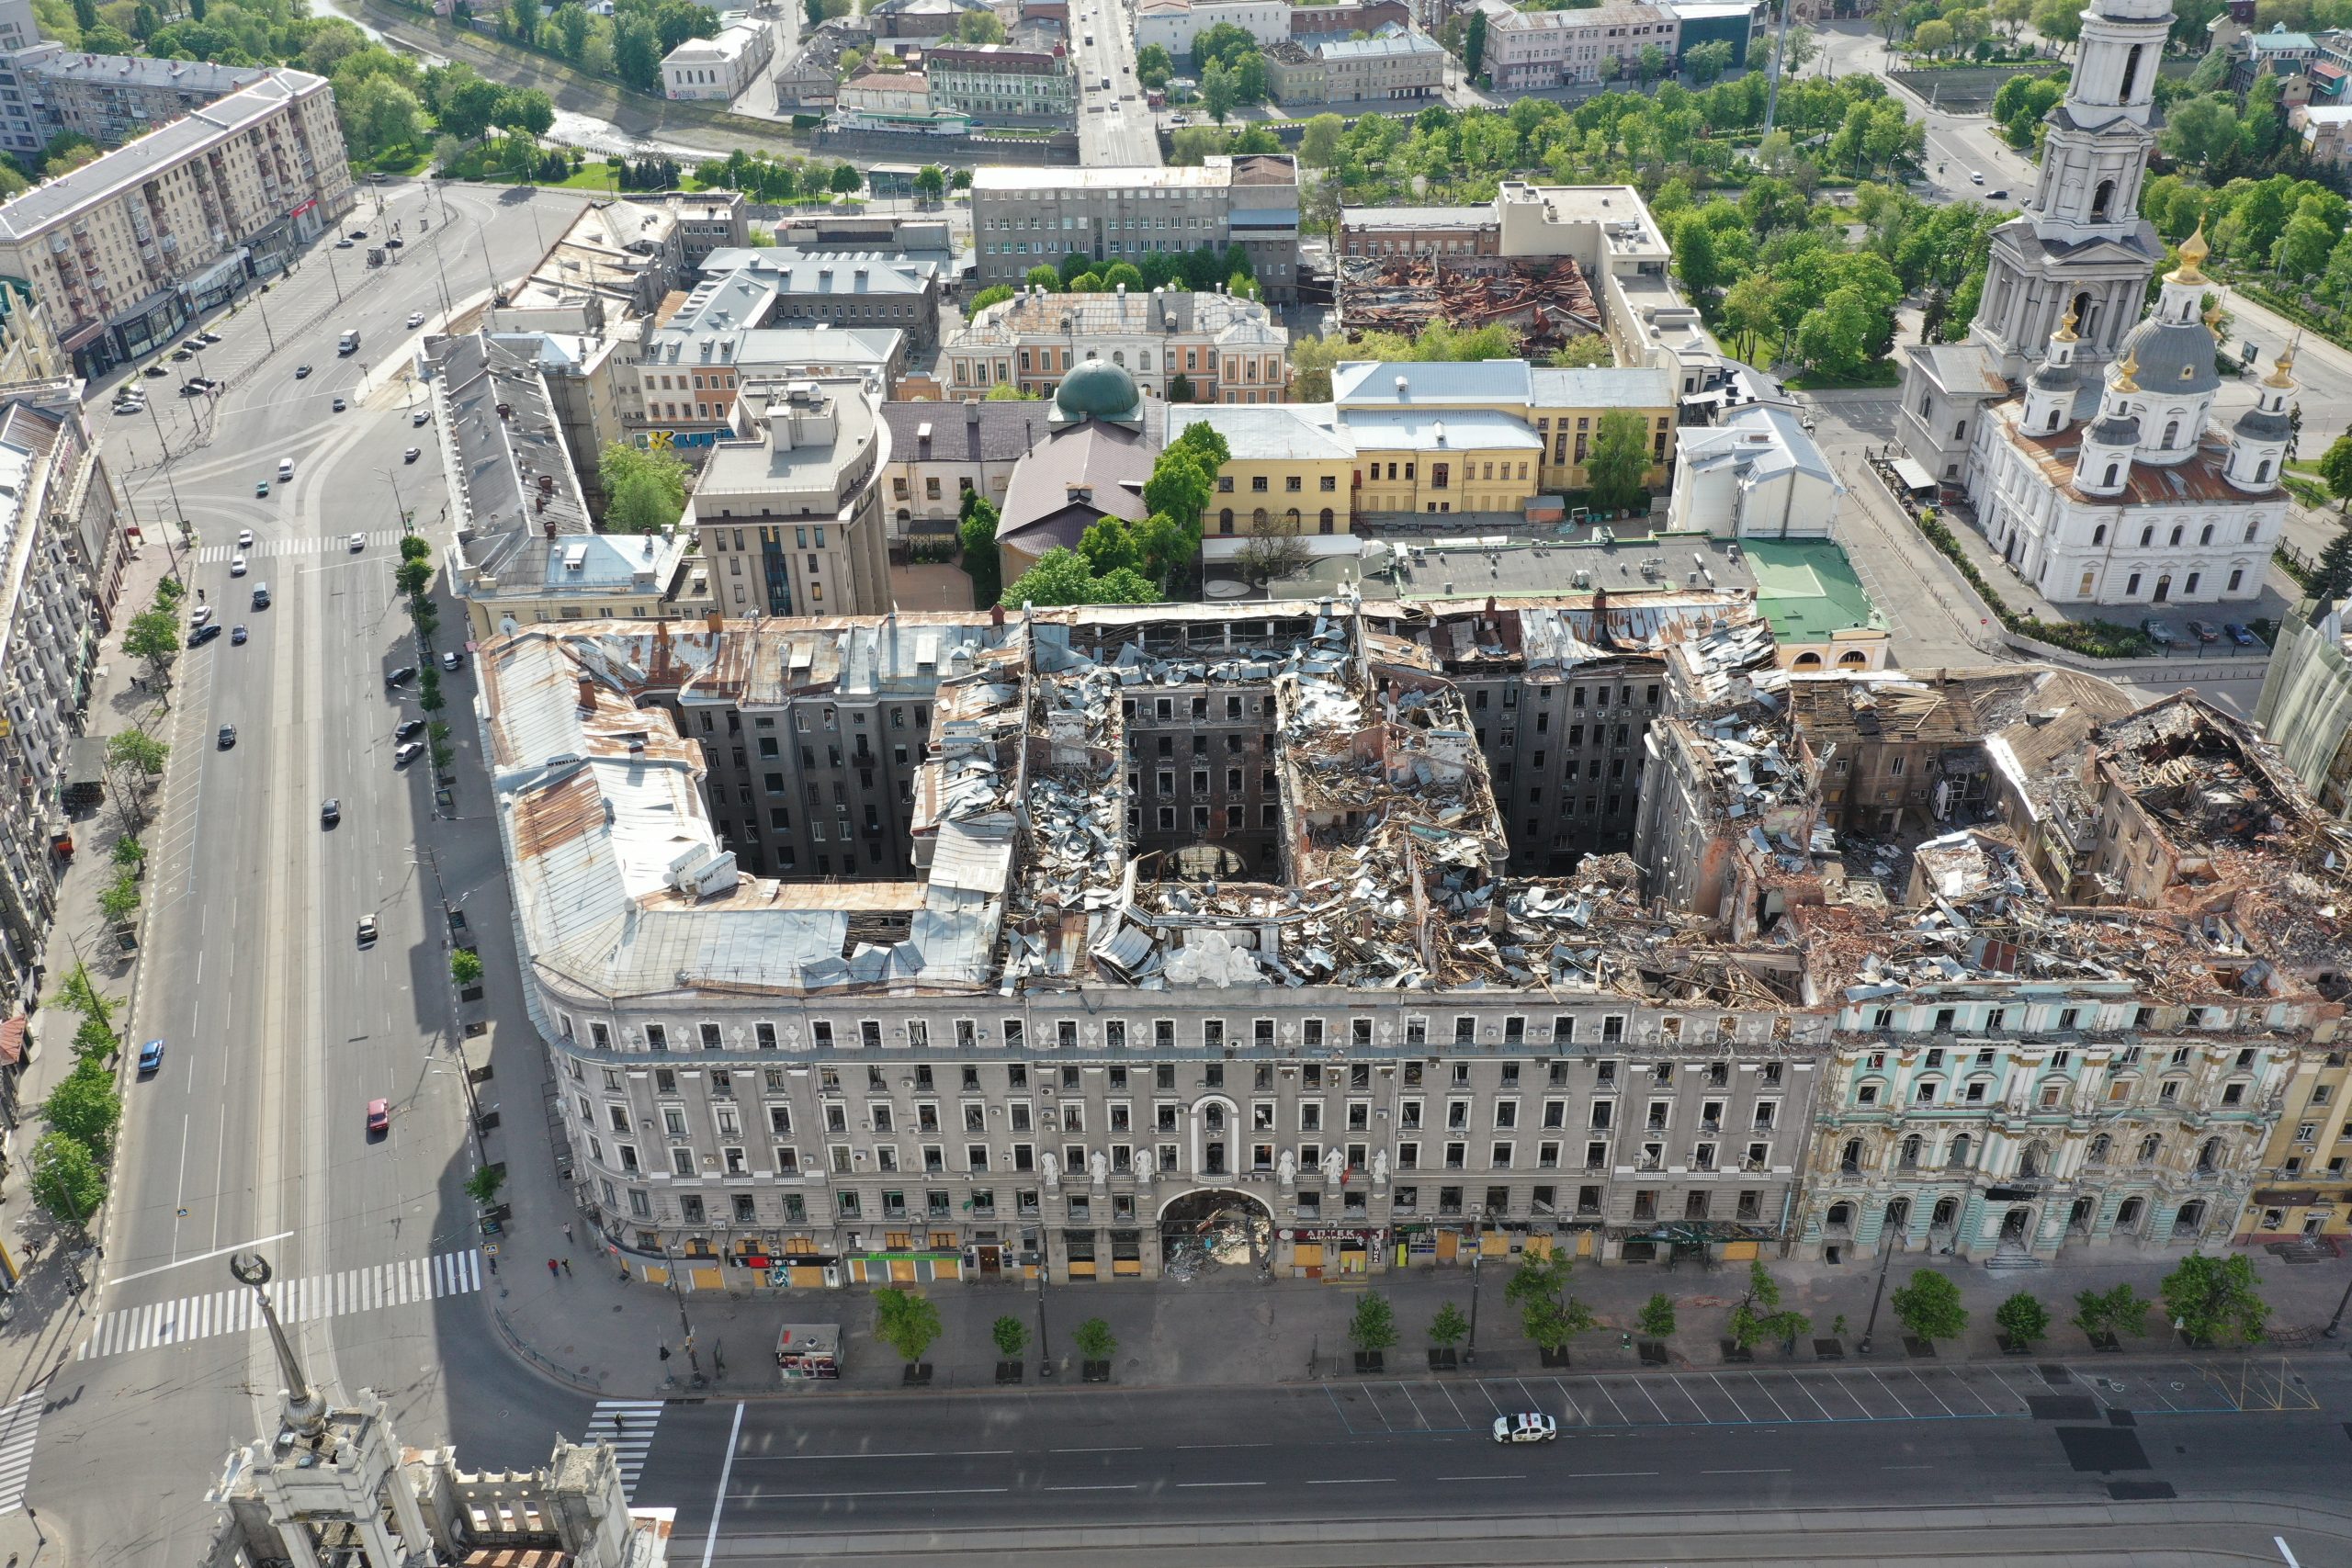 Constitution Square in the historical centre of Kharkiv. The grey office building, known as the Palace of Labour, was commissioned by the “Insurance Company Russia” and finished by 1916. It was hit by the rockets from a flyover Russian bomber on March 2, 2022. As seen from the drone on May 20, 2022.